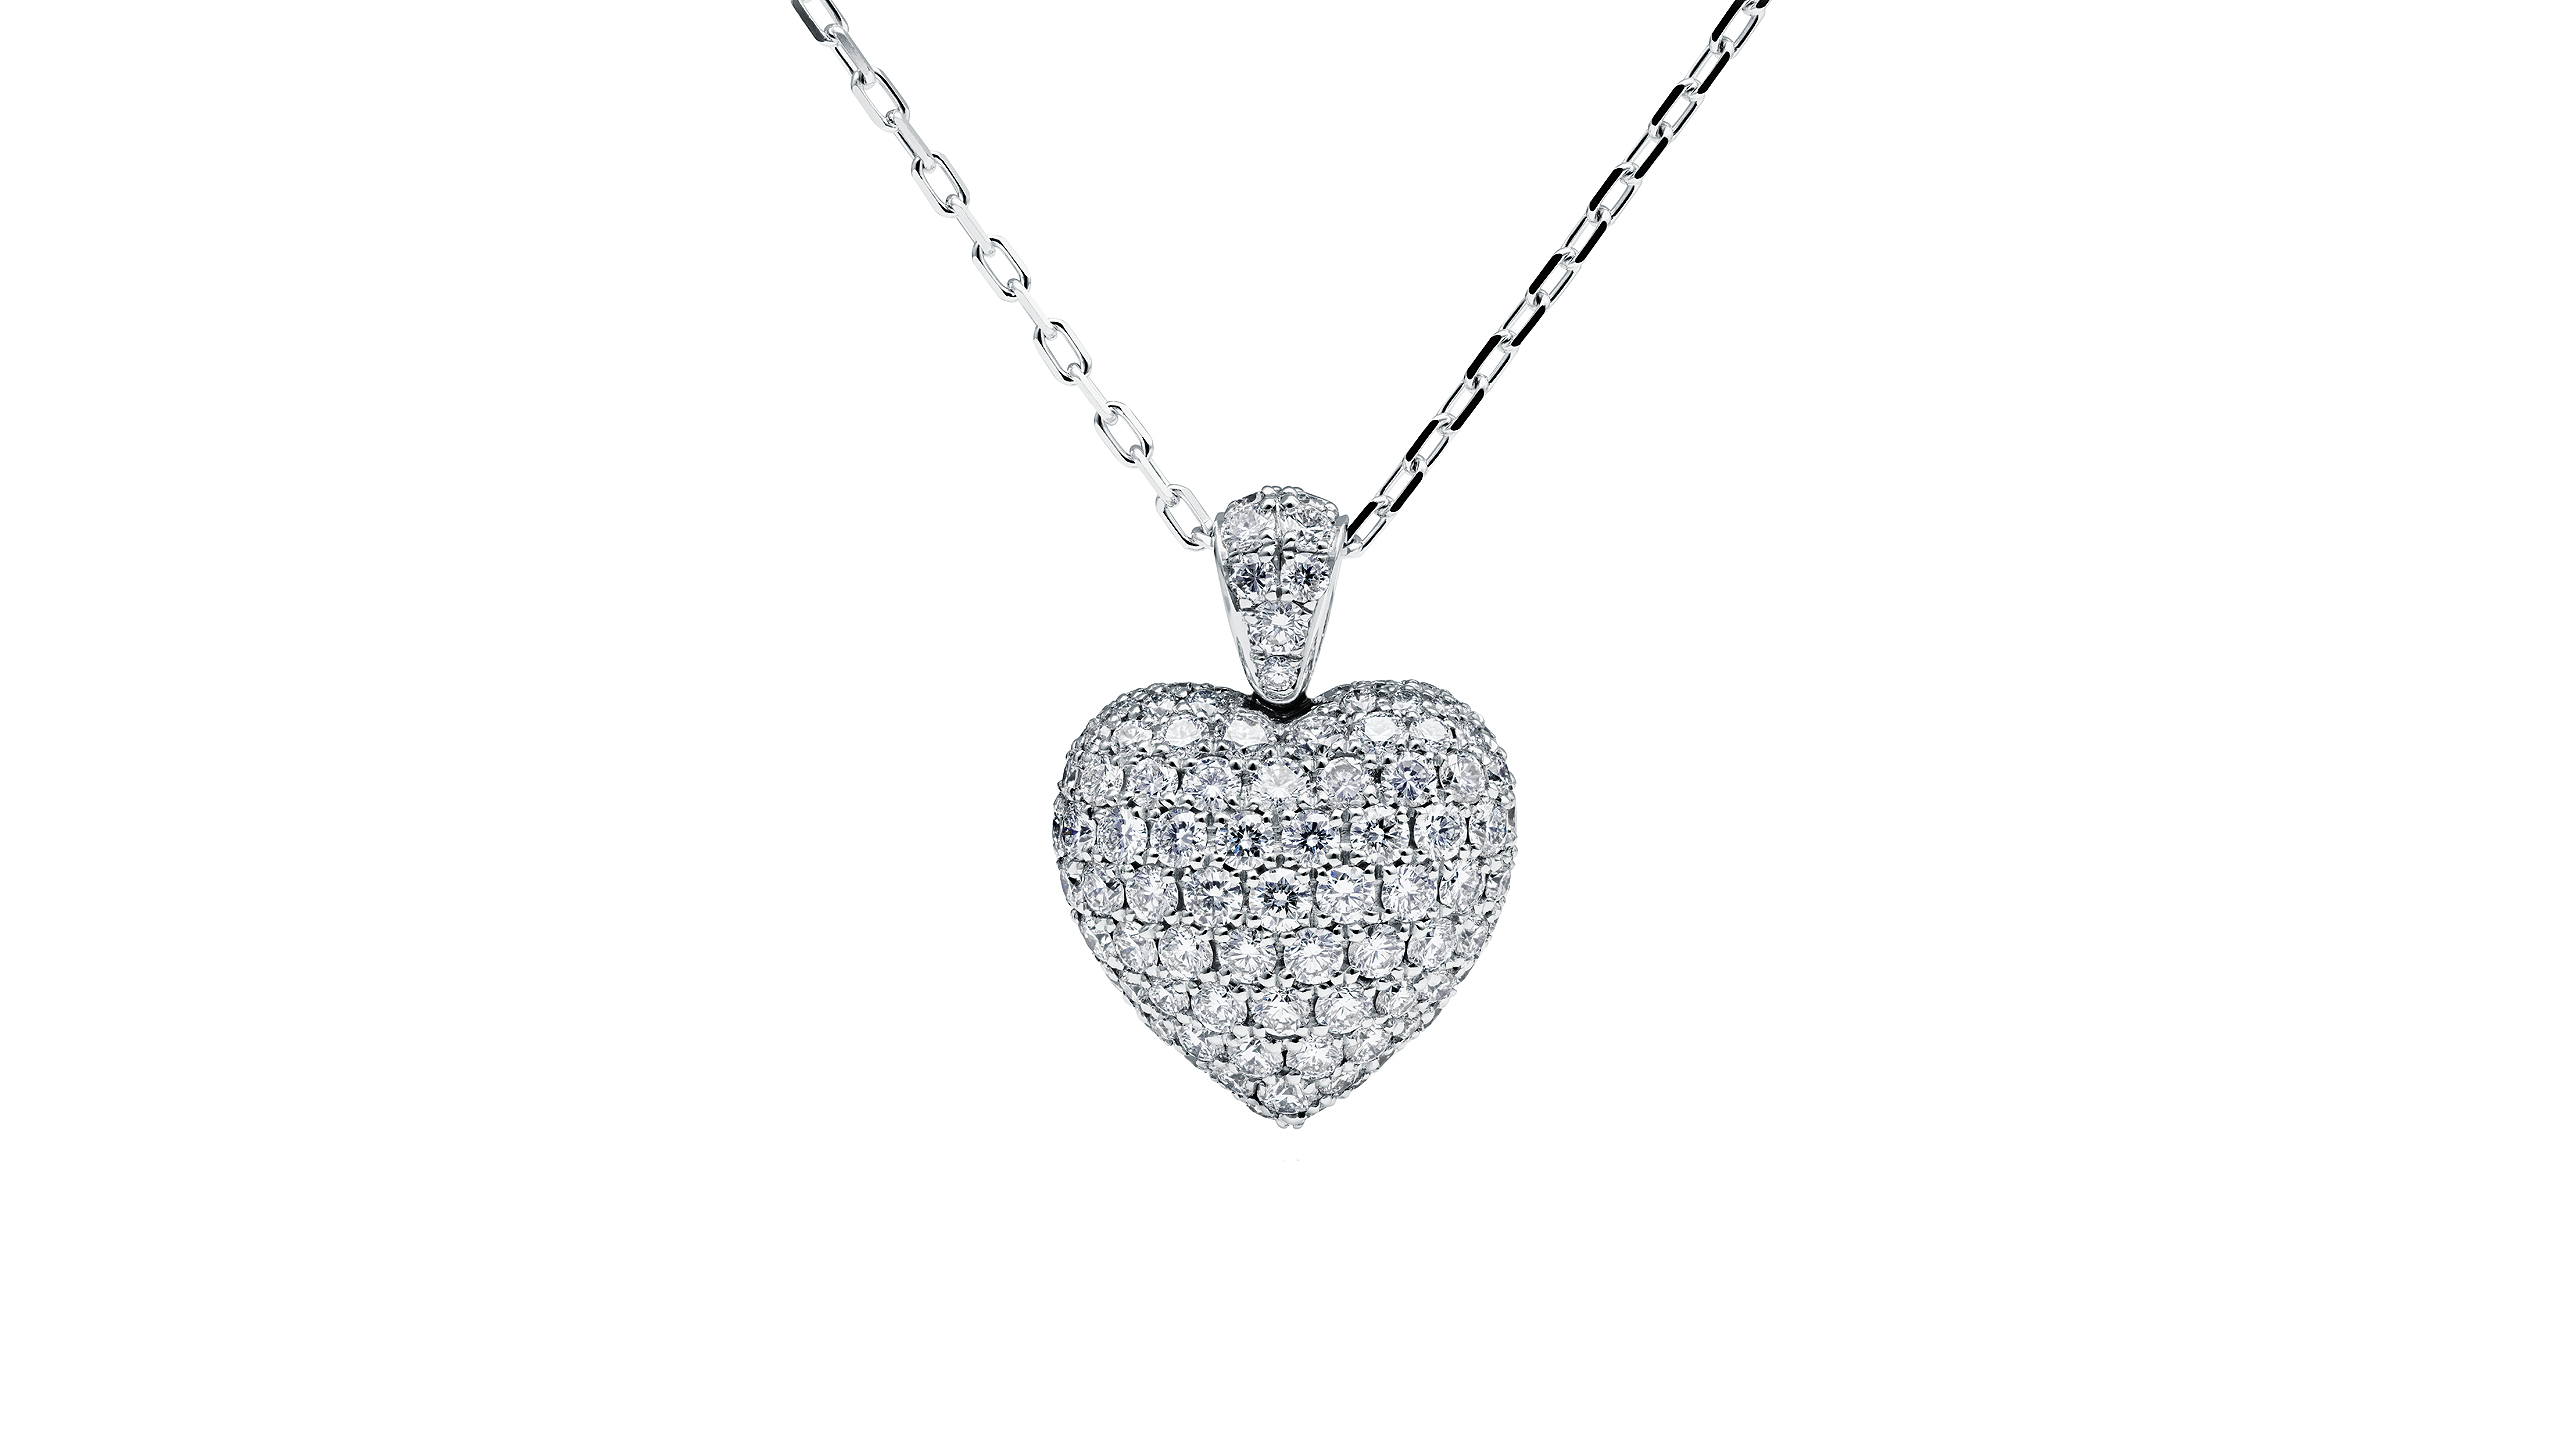 https://towejewels.com/wp-content/uploads/2015/06/diamond_heart_small_ny_OK_2560x1440_overview_web.jpg